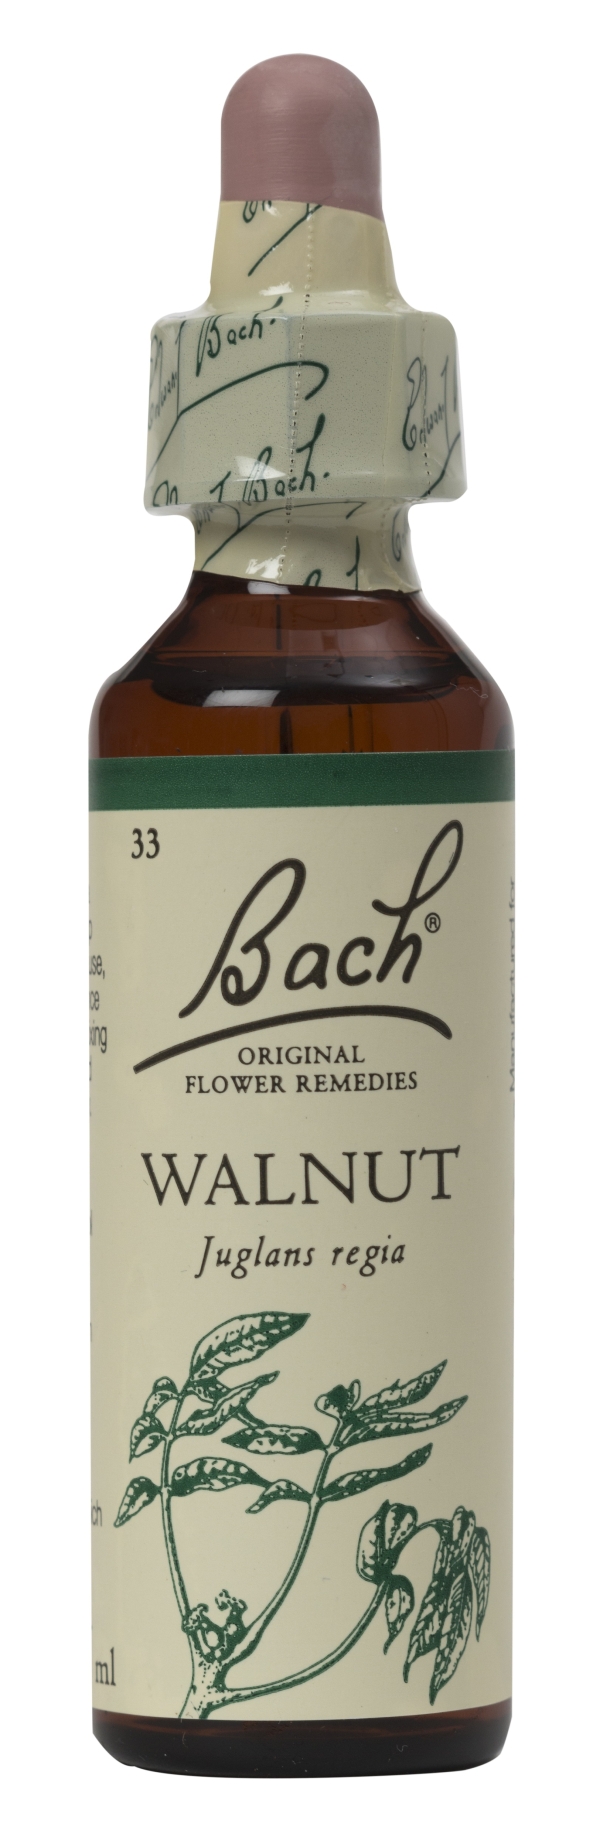 Nelson Bach Flower Remedies: Bach Walnut Flower Remedy (20ml) available online here